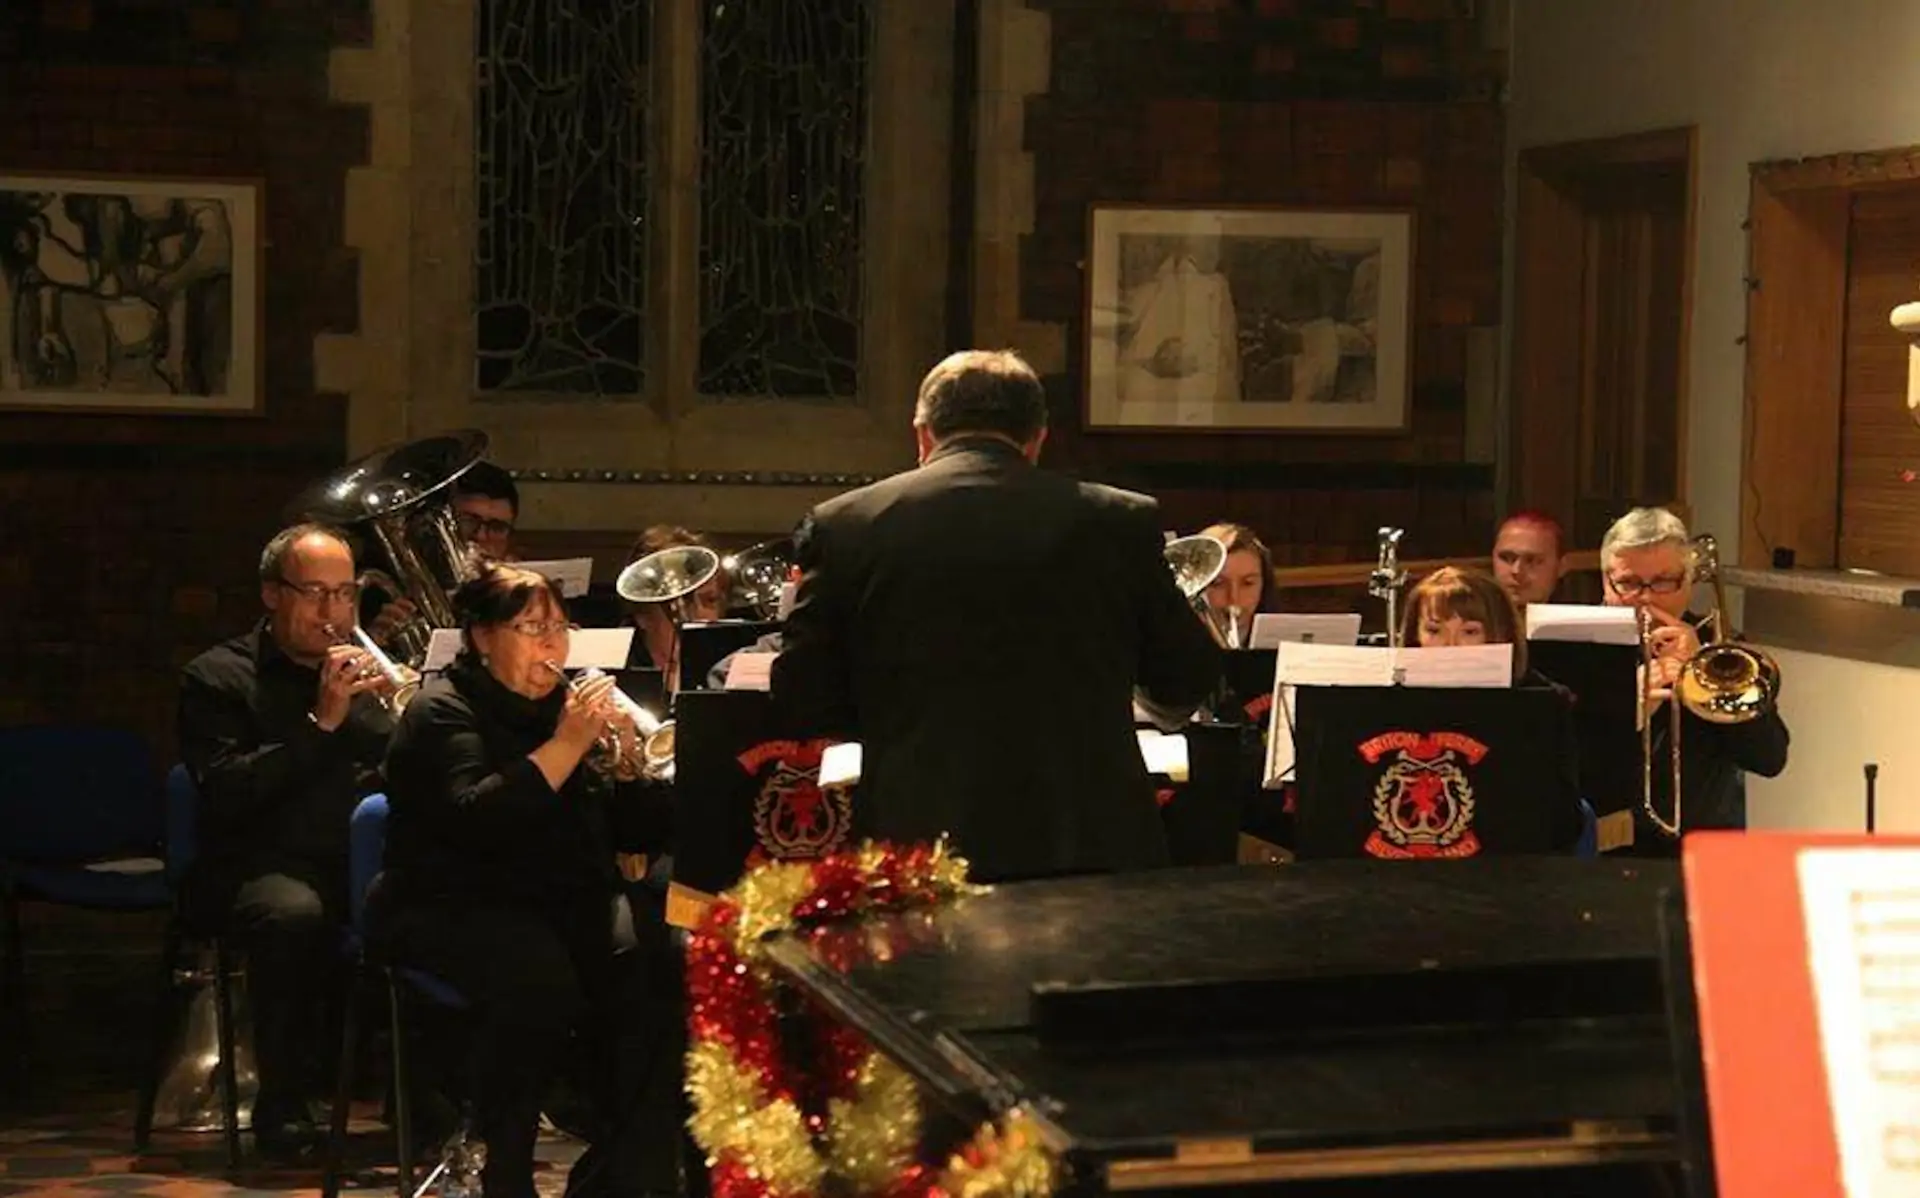 A small group of players from Briton Ferry Silver Band in concert in a church.